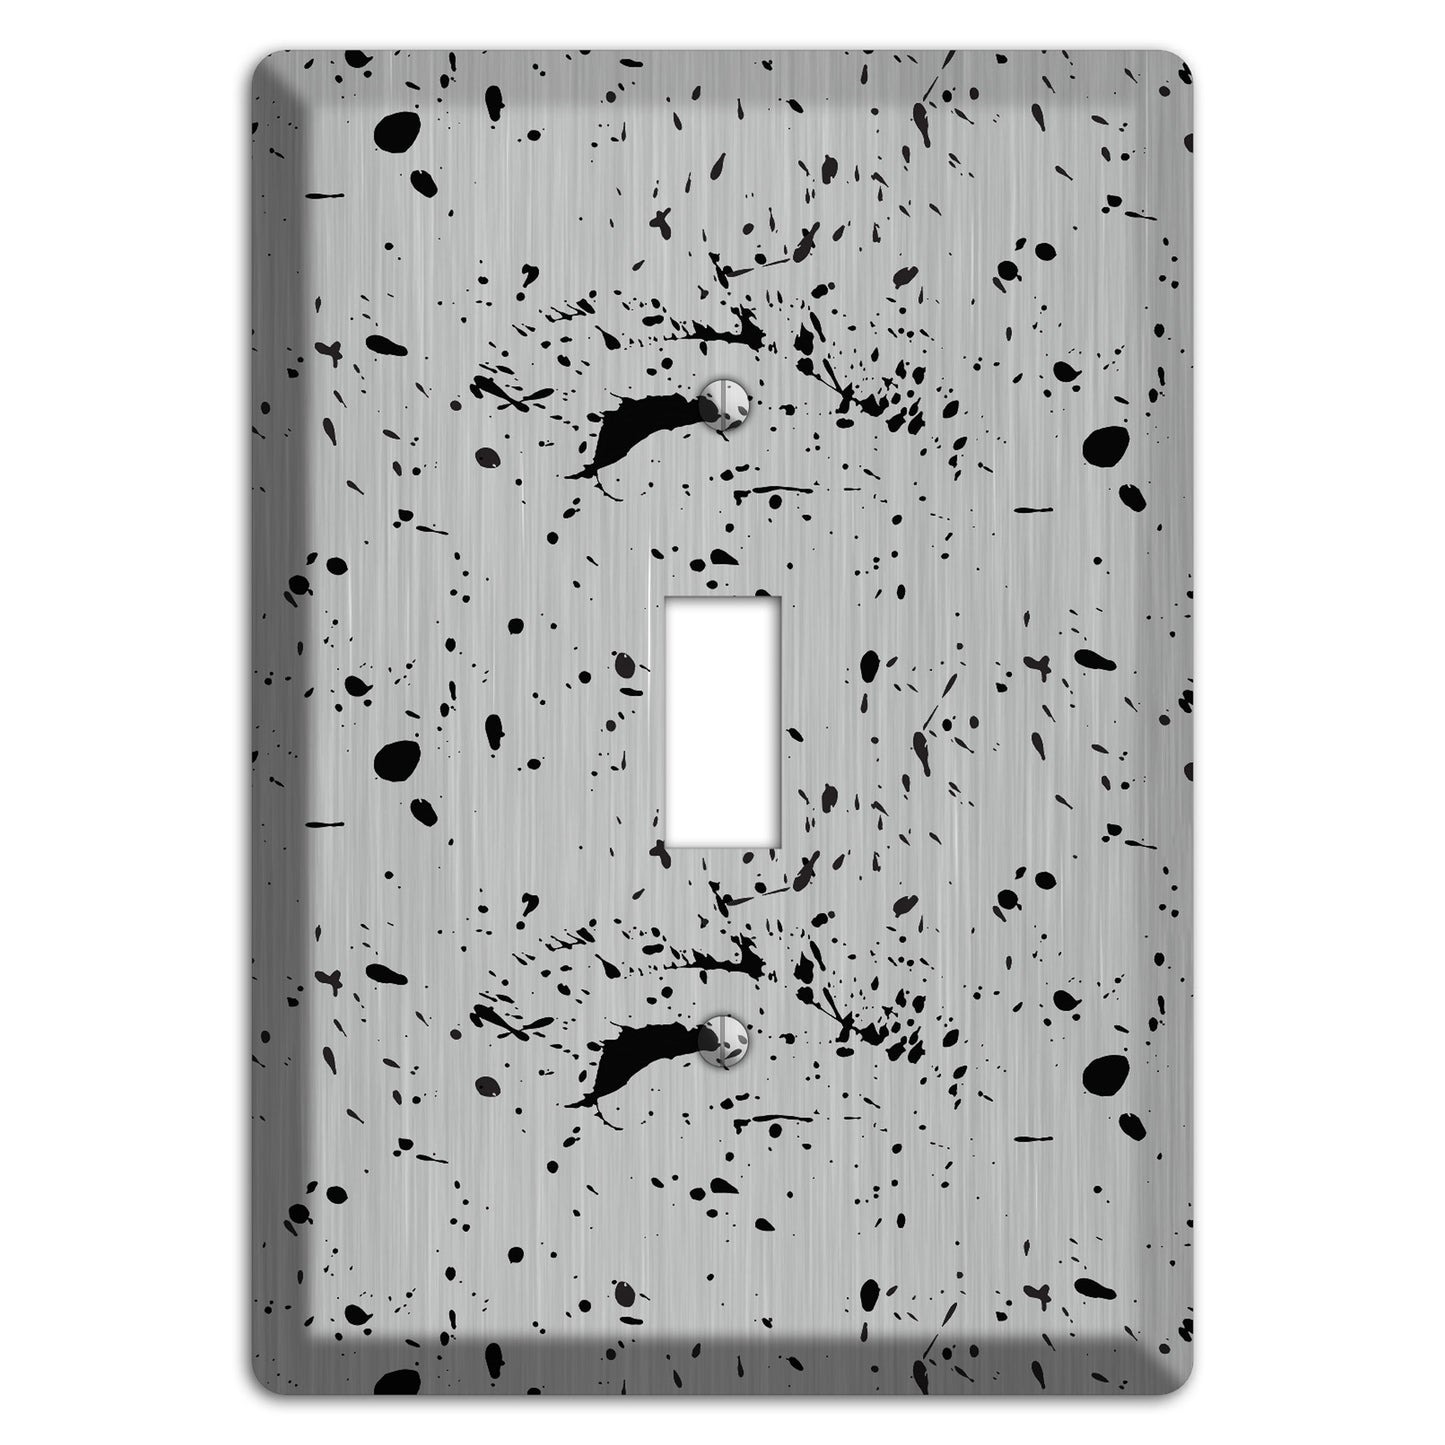 Ink Splash 5 Stainless Cover Plates